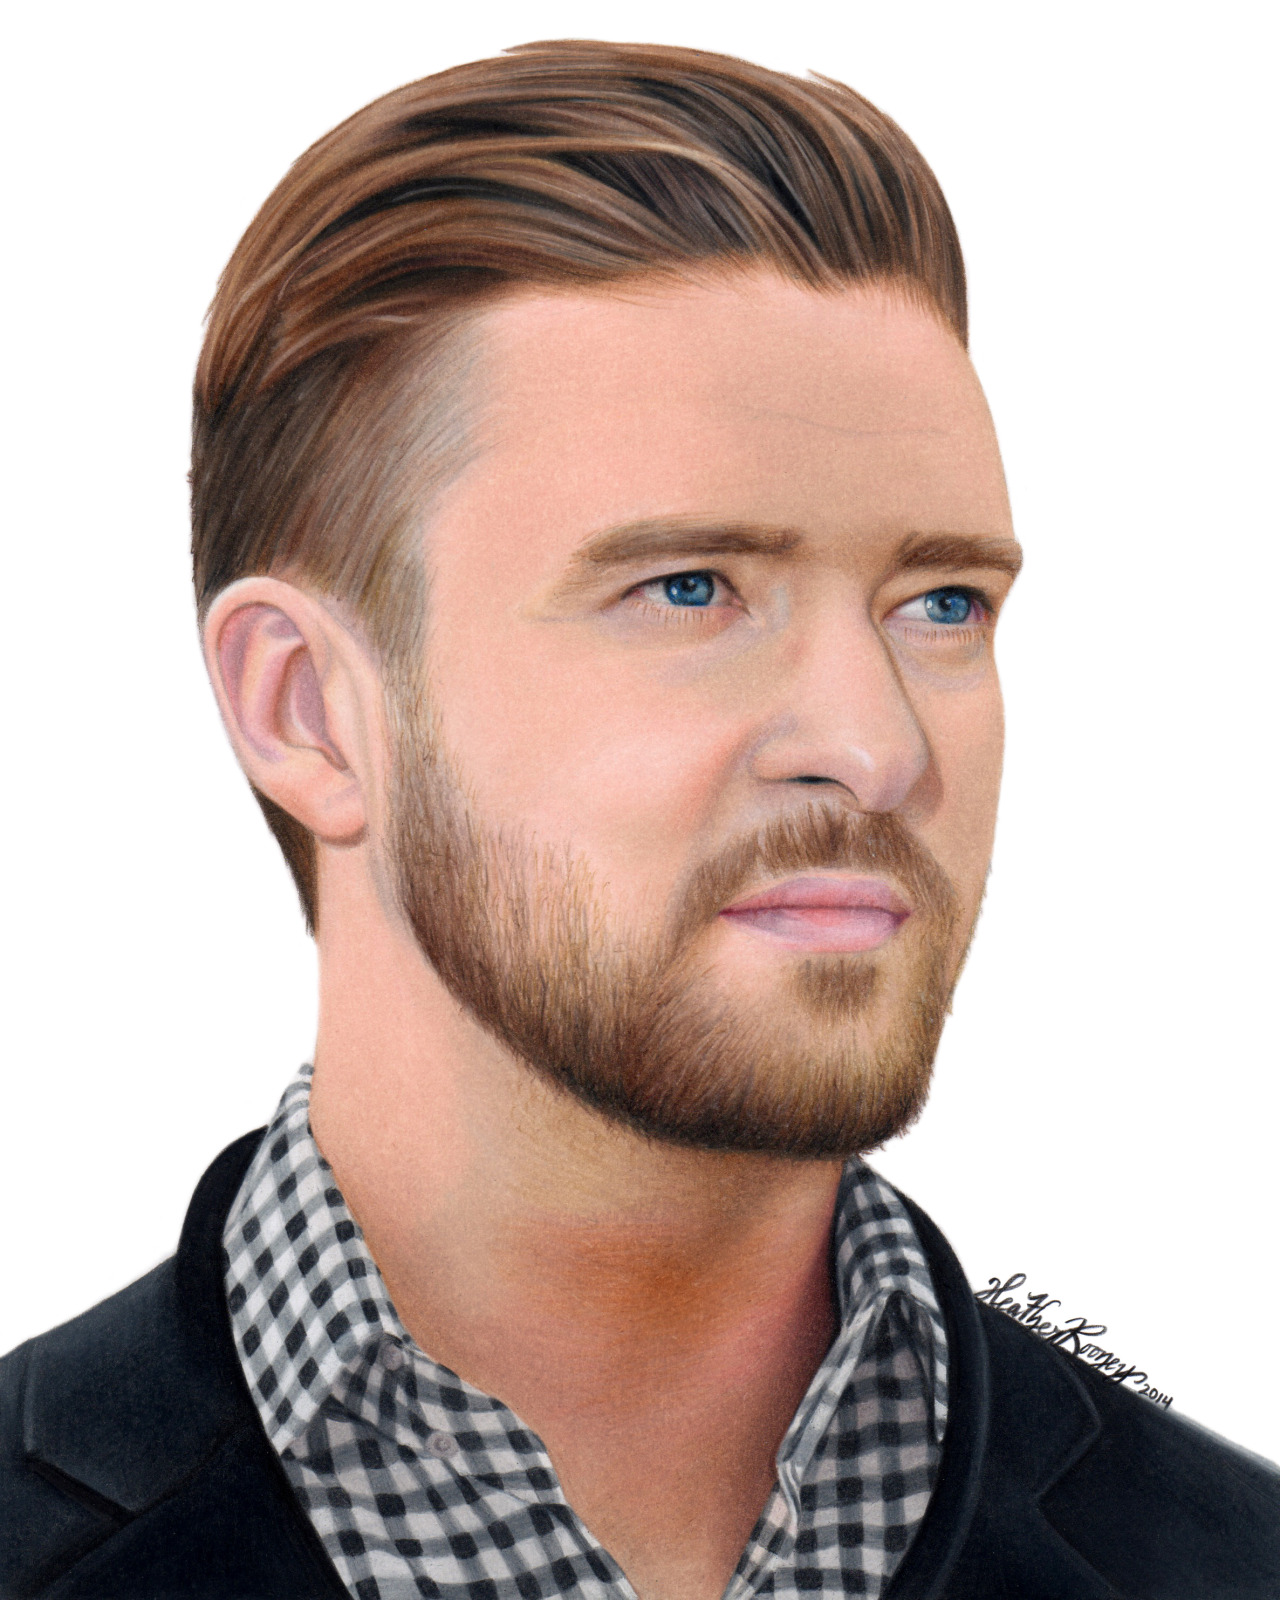 Heather Rooney Art — Colored pencil drawing of Justin Timberlake